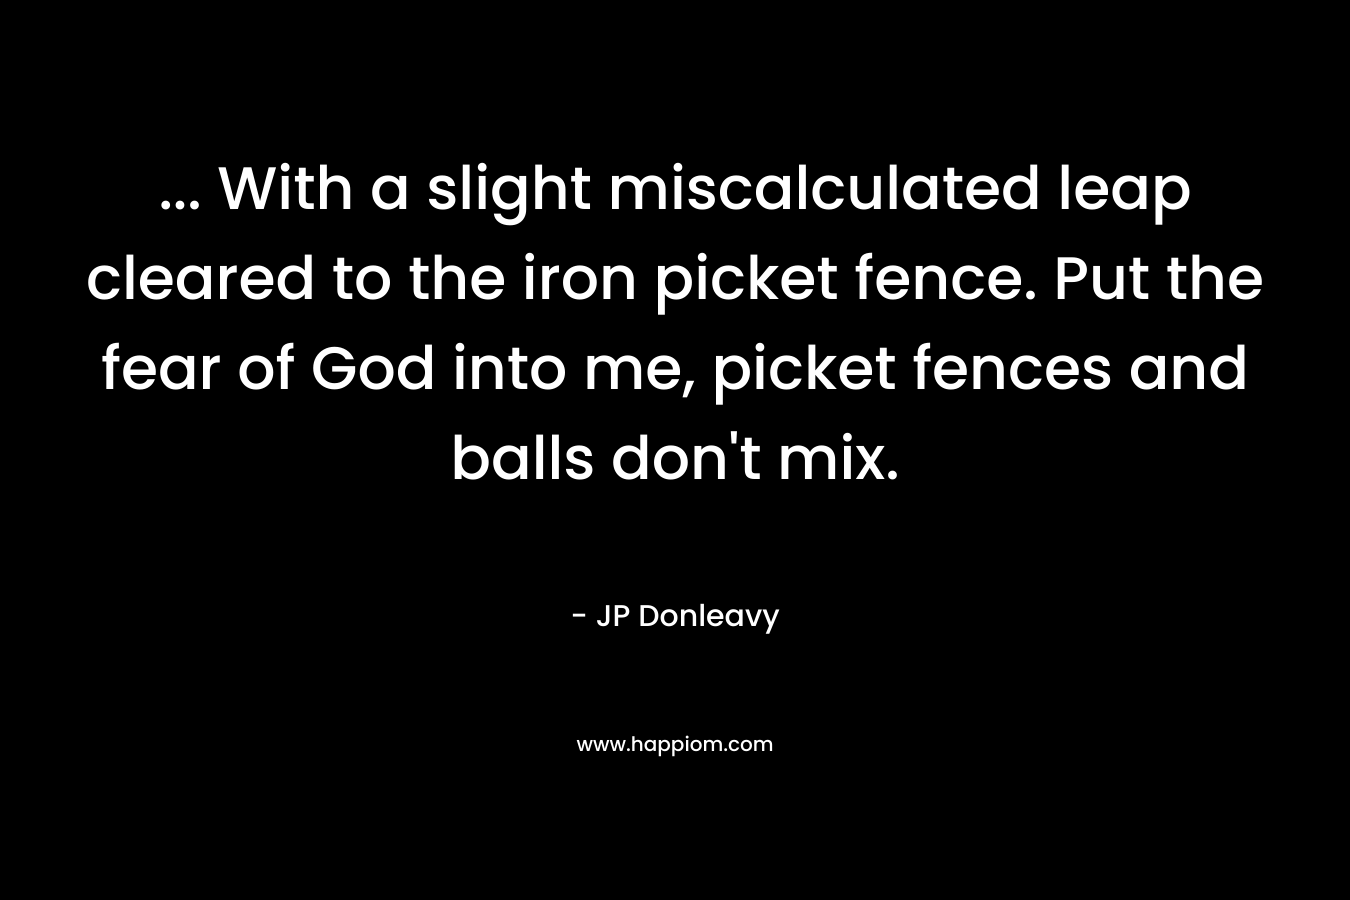 … With a slight miscalculated leap cleared to the iron picket fence. Put the fear of God into me, picket fences and balls don’t mix. – JP Donleavy